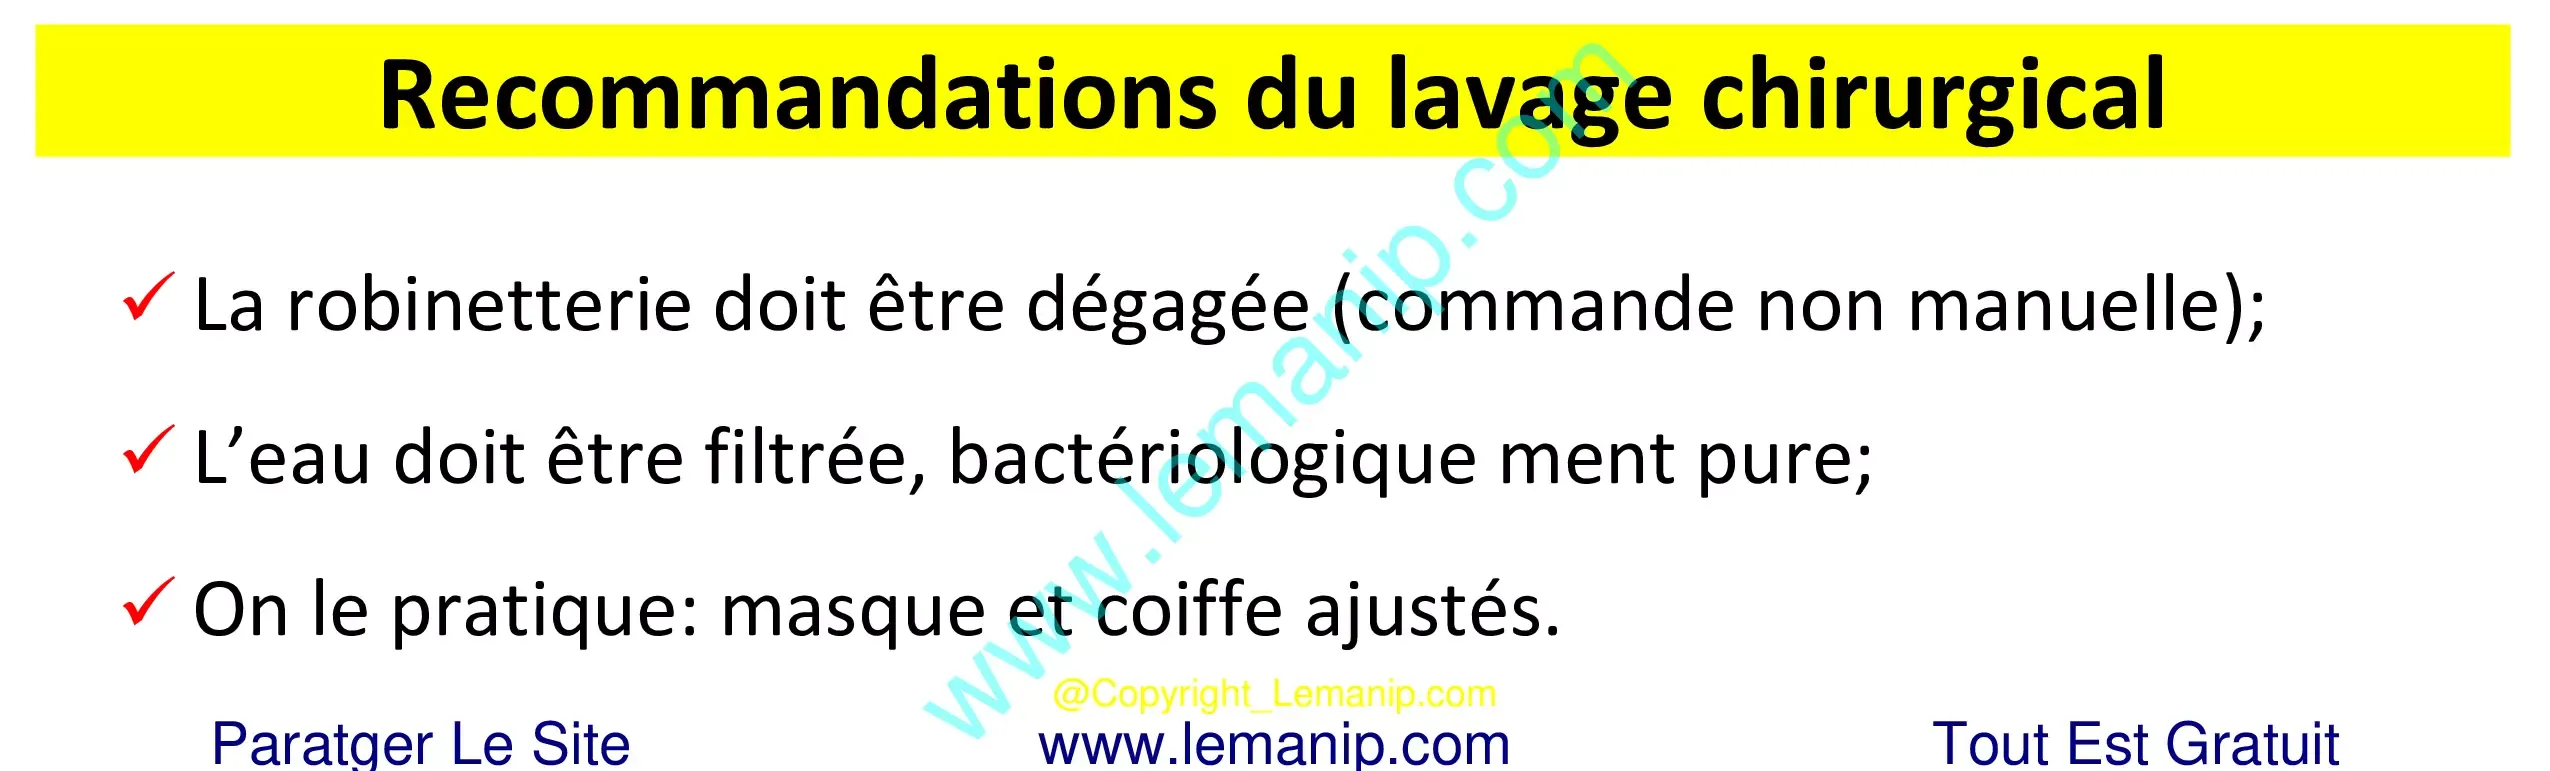 Recommandations du lavage chirurgical